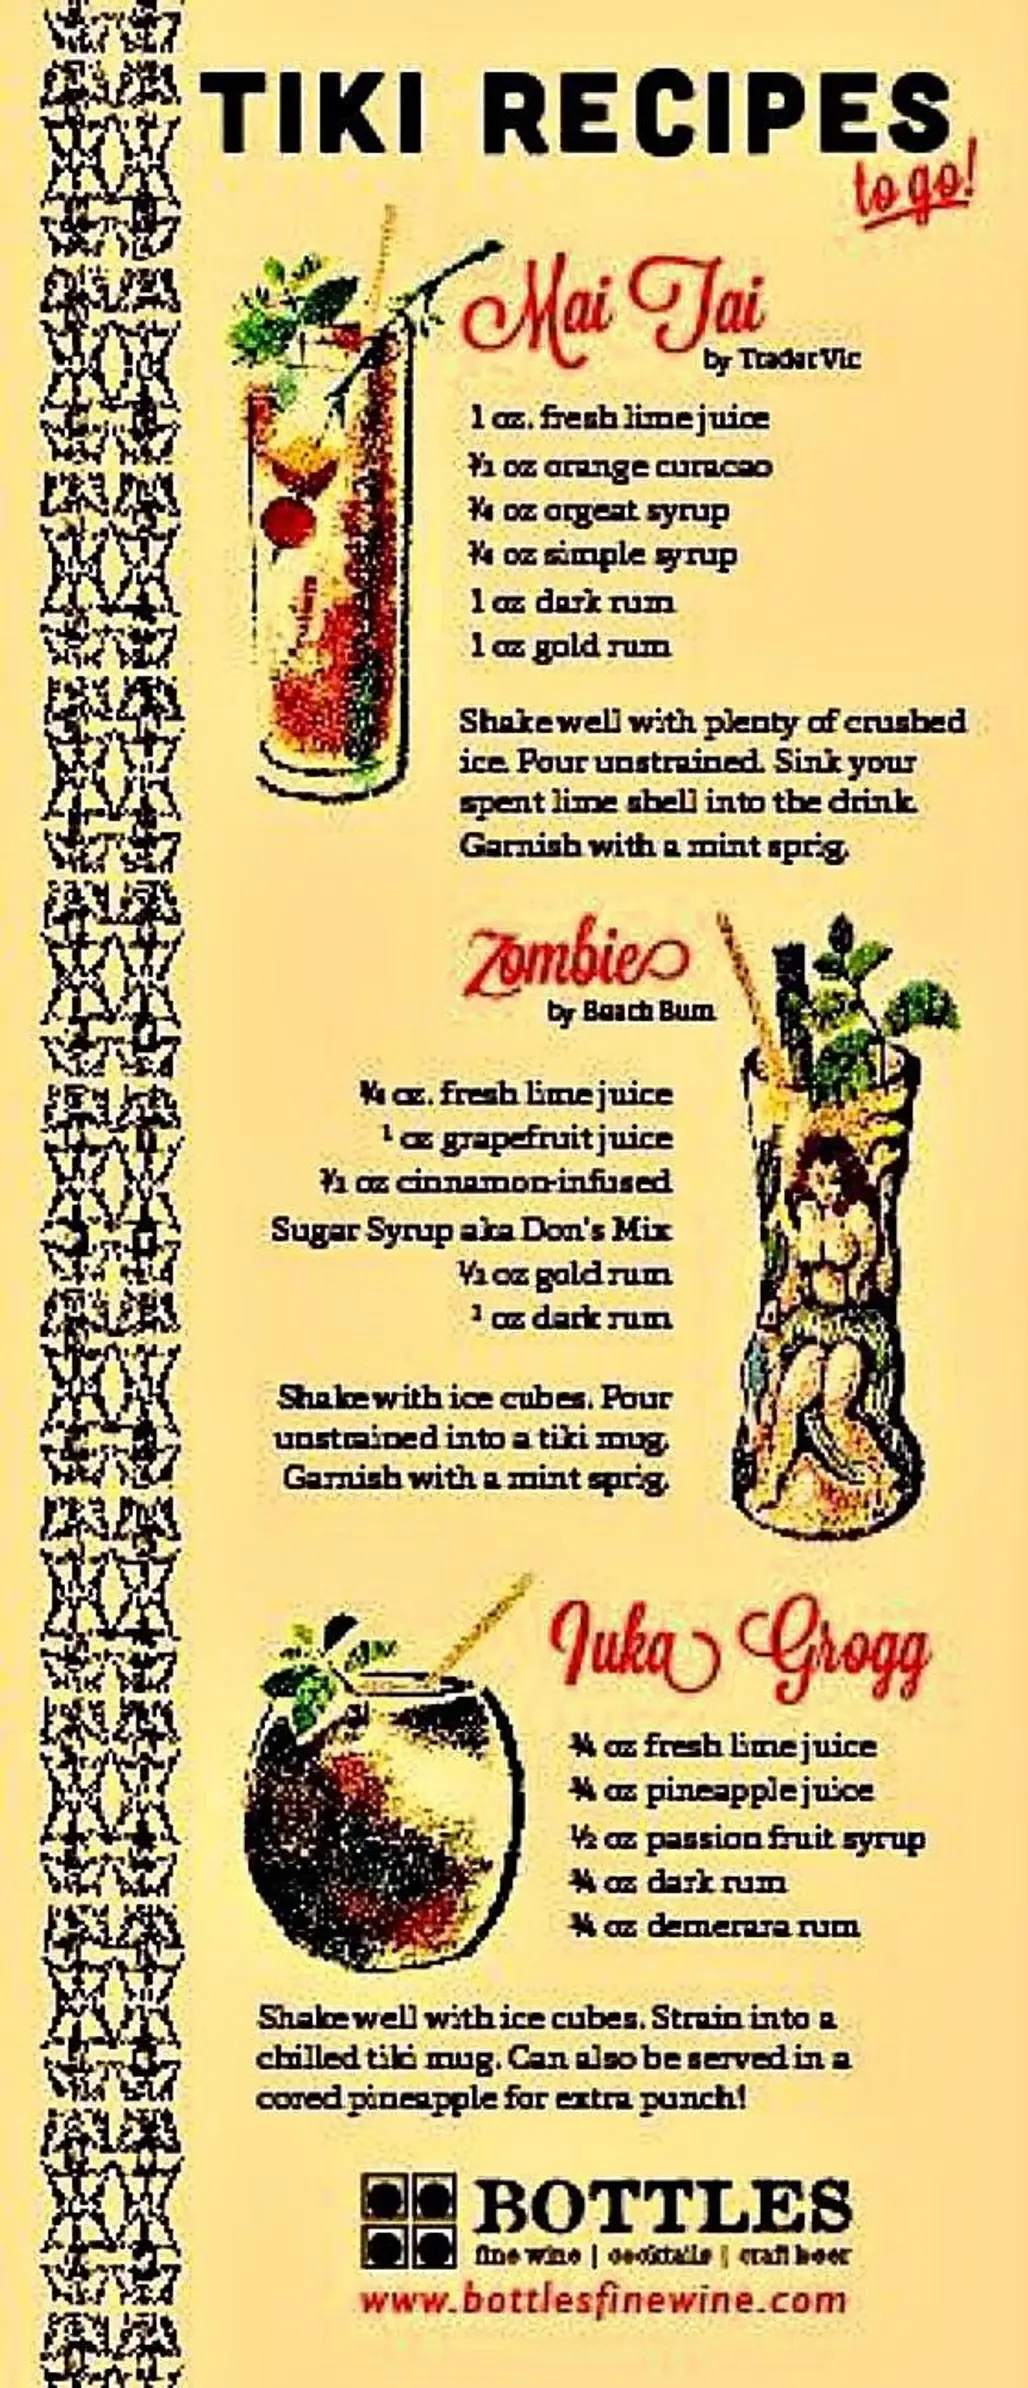 It’s Time for Vintage Tiki Party Drinks